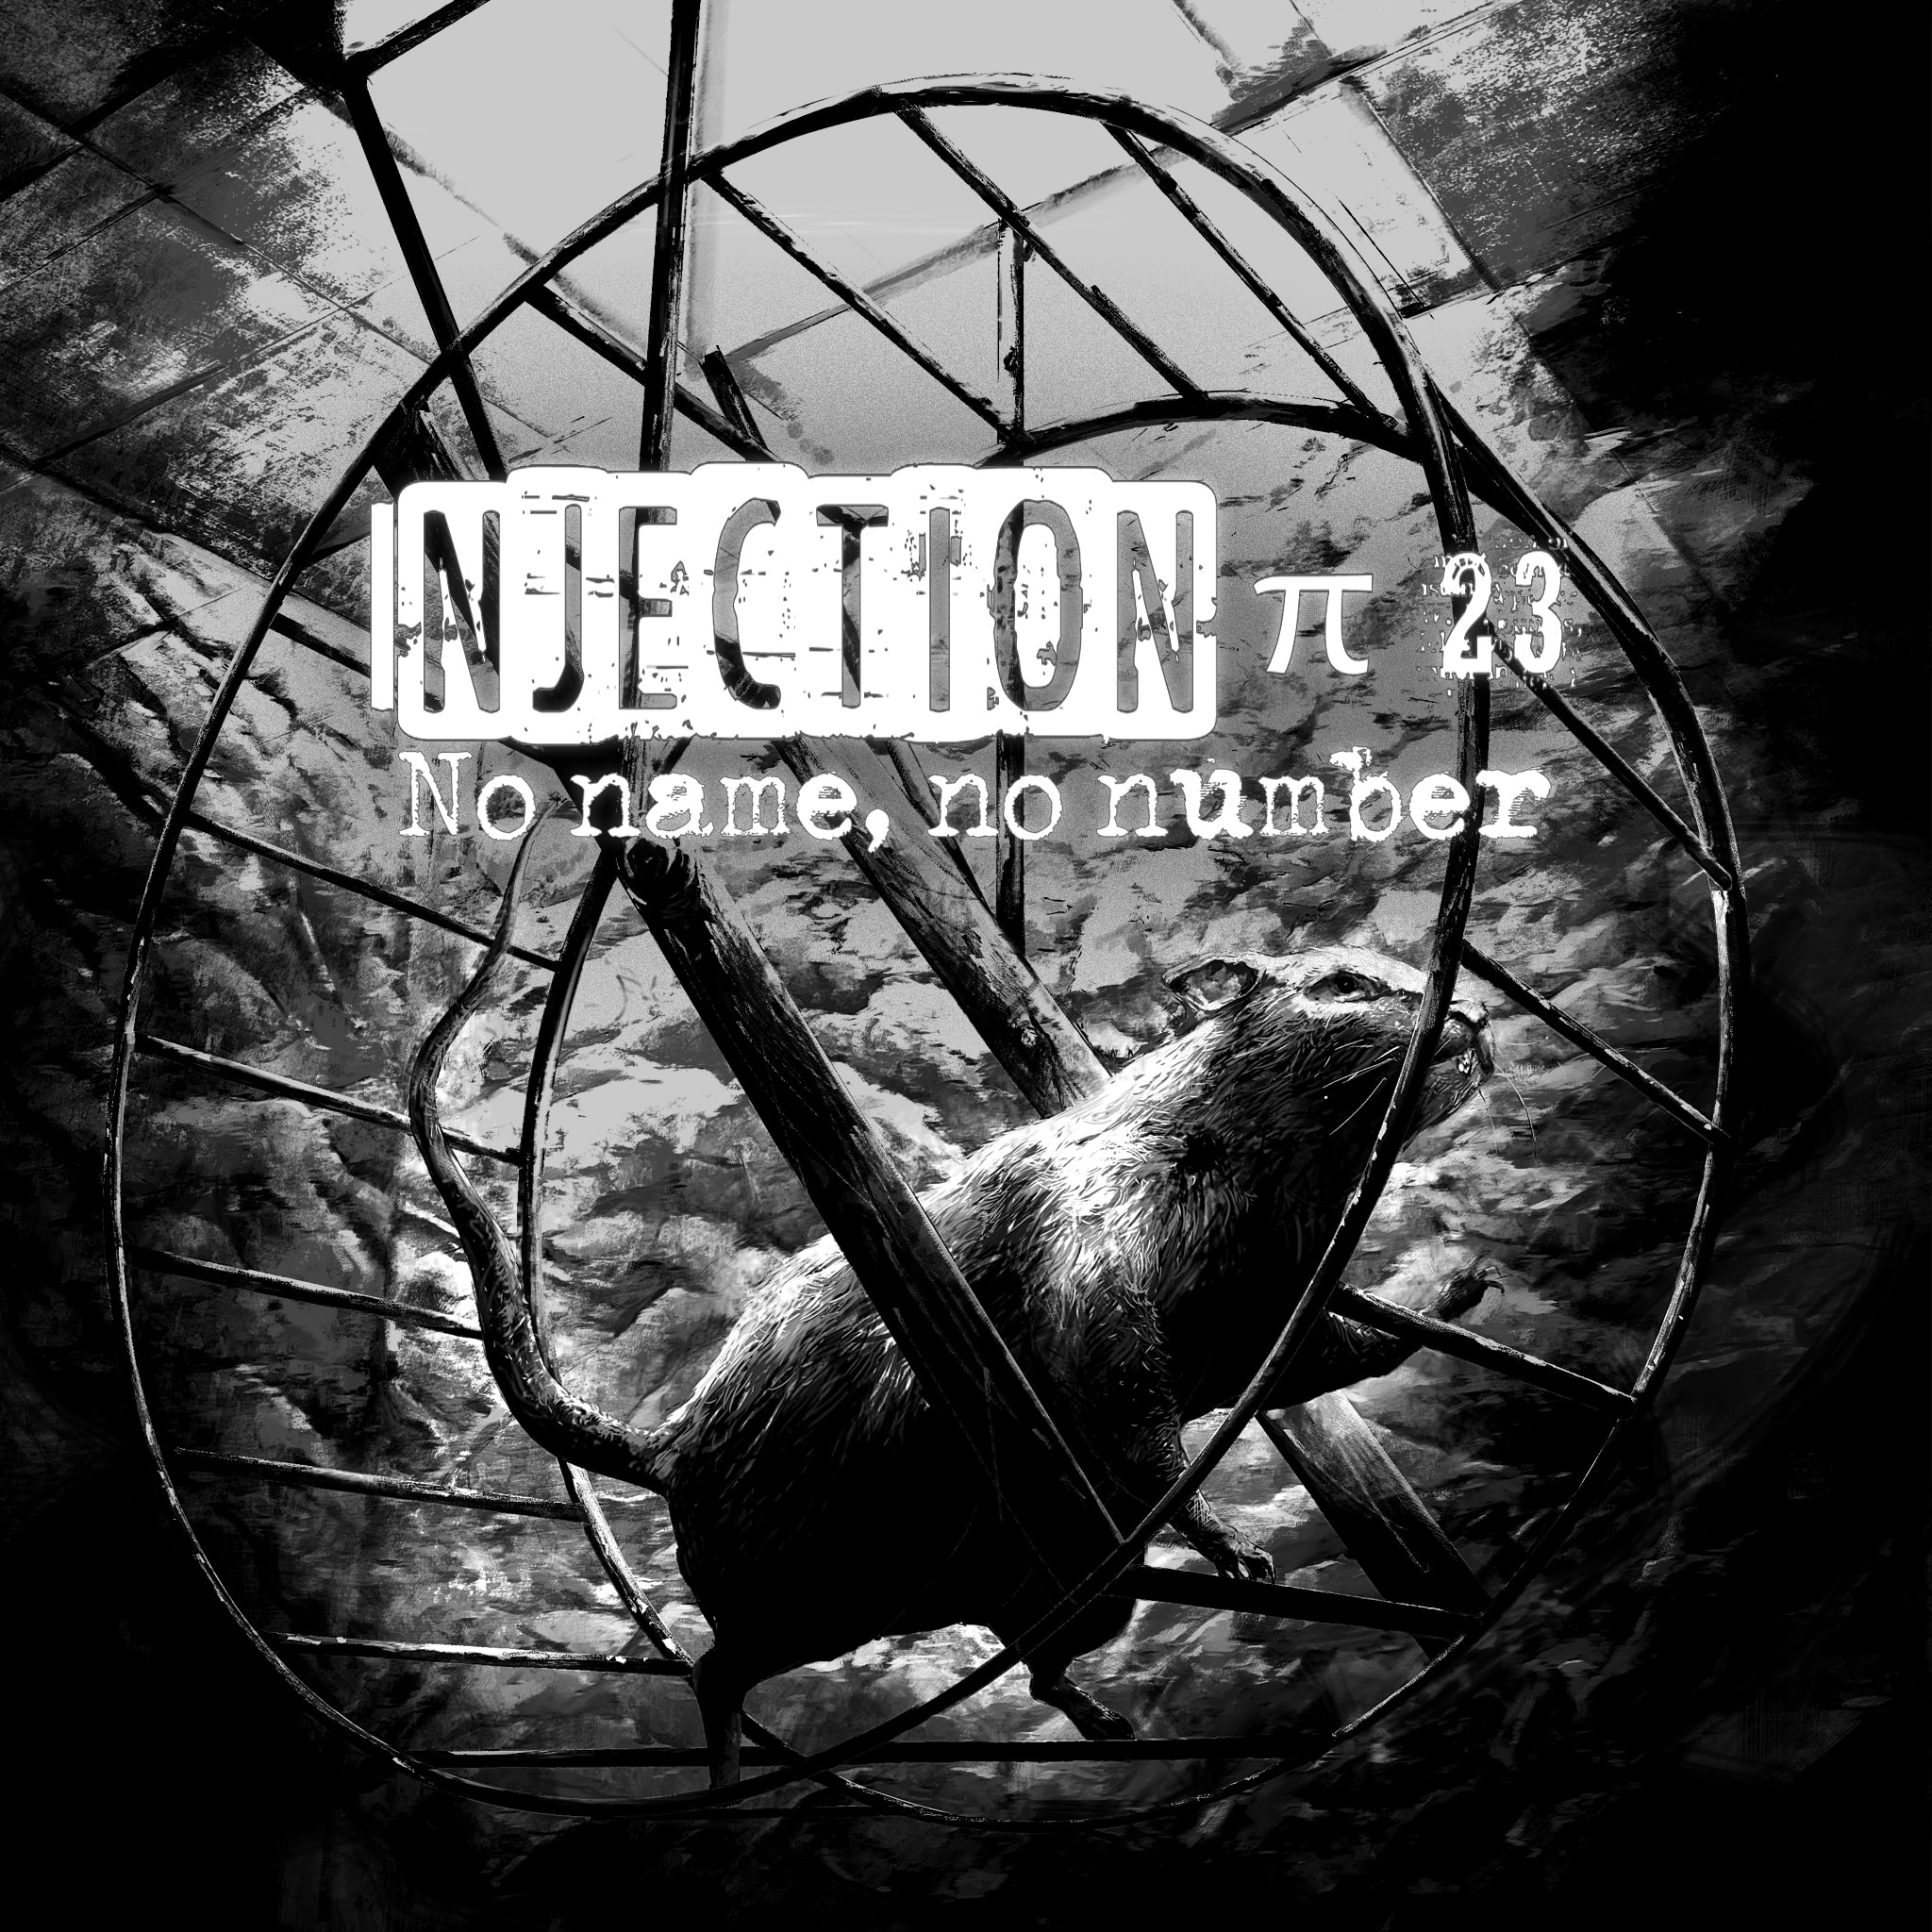 Injection π23 'No name, no number' (영어판)